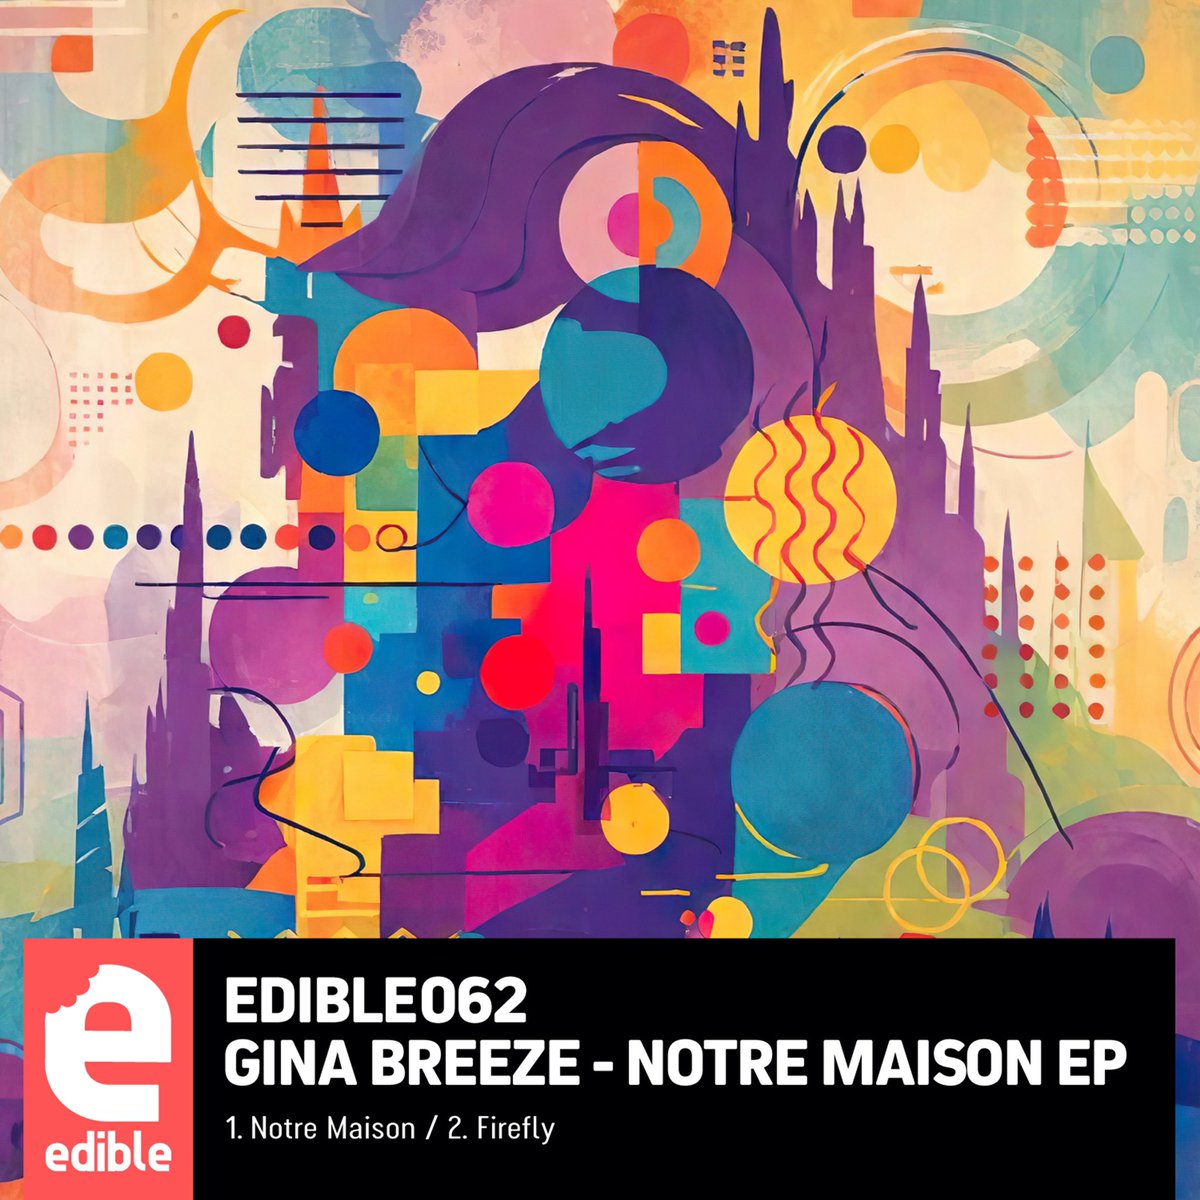 Excited to announce the return of the talented @GinaBreezeDJ to the label! She’s dropping her Notre Maison EP, packed with two absolute bangers: 1. Notre Maison 2. Firely Out on the 19th April, hit the link in bio to pre-save now🙌🏼